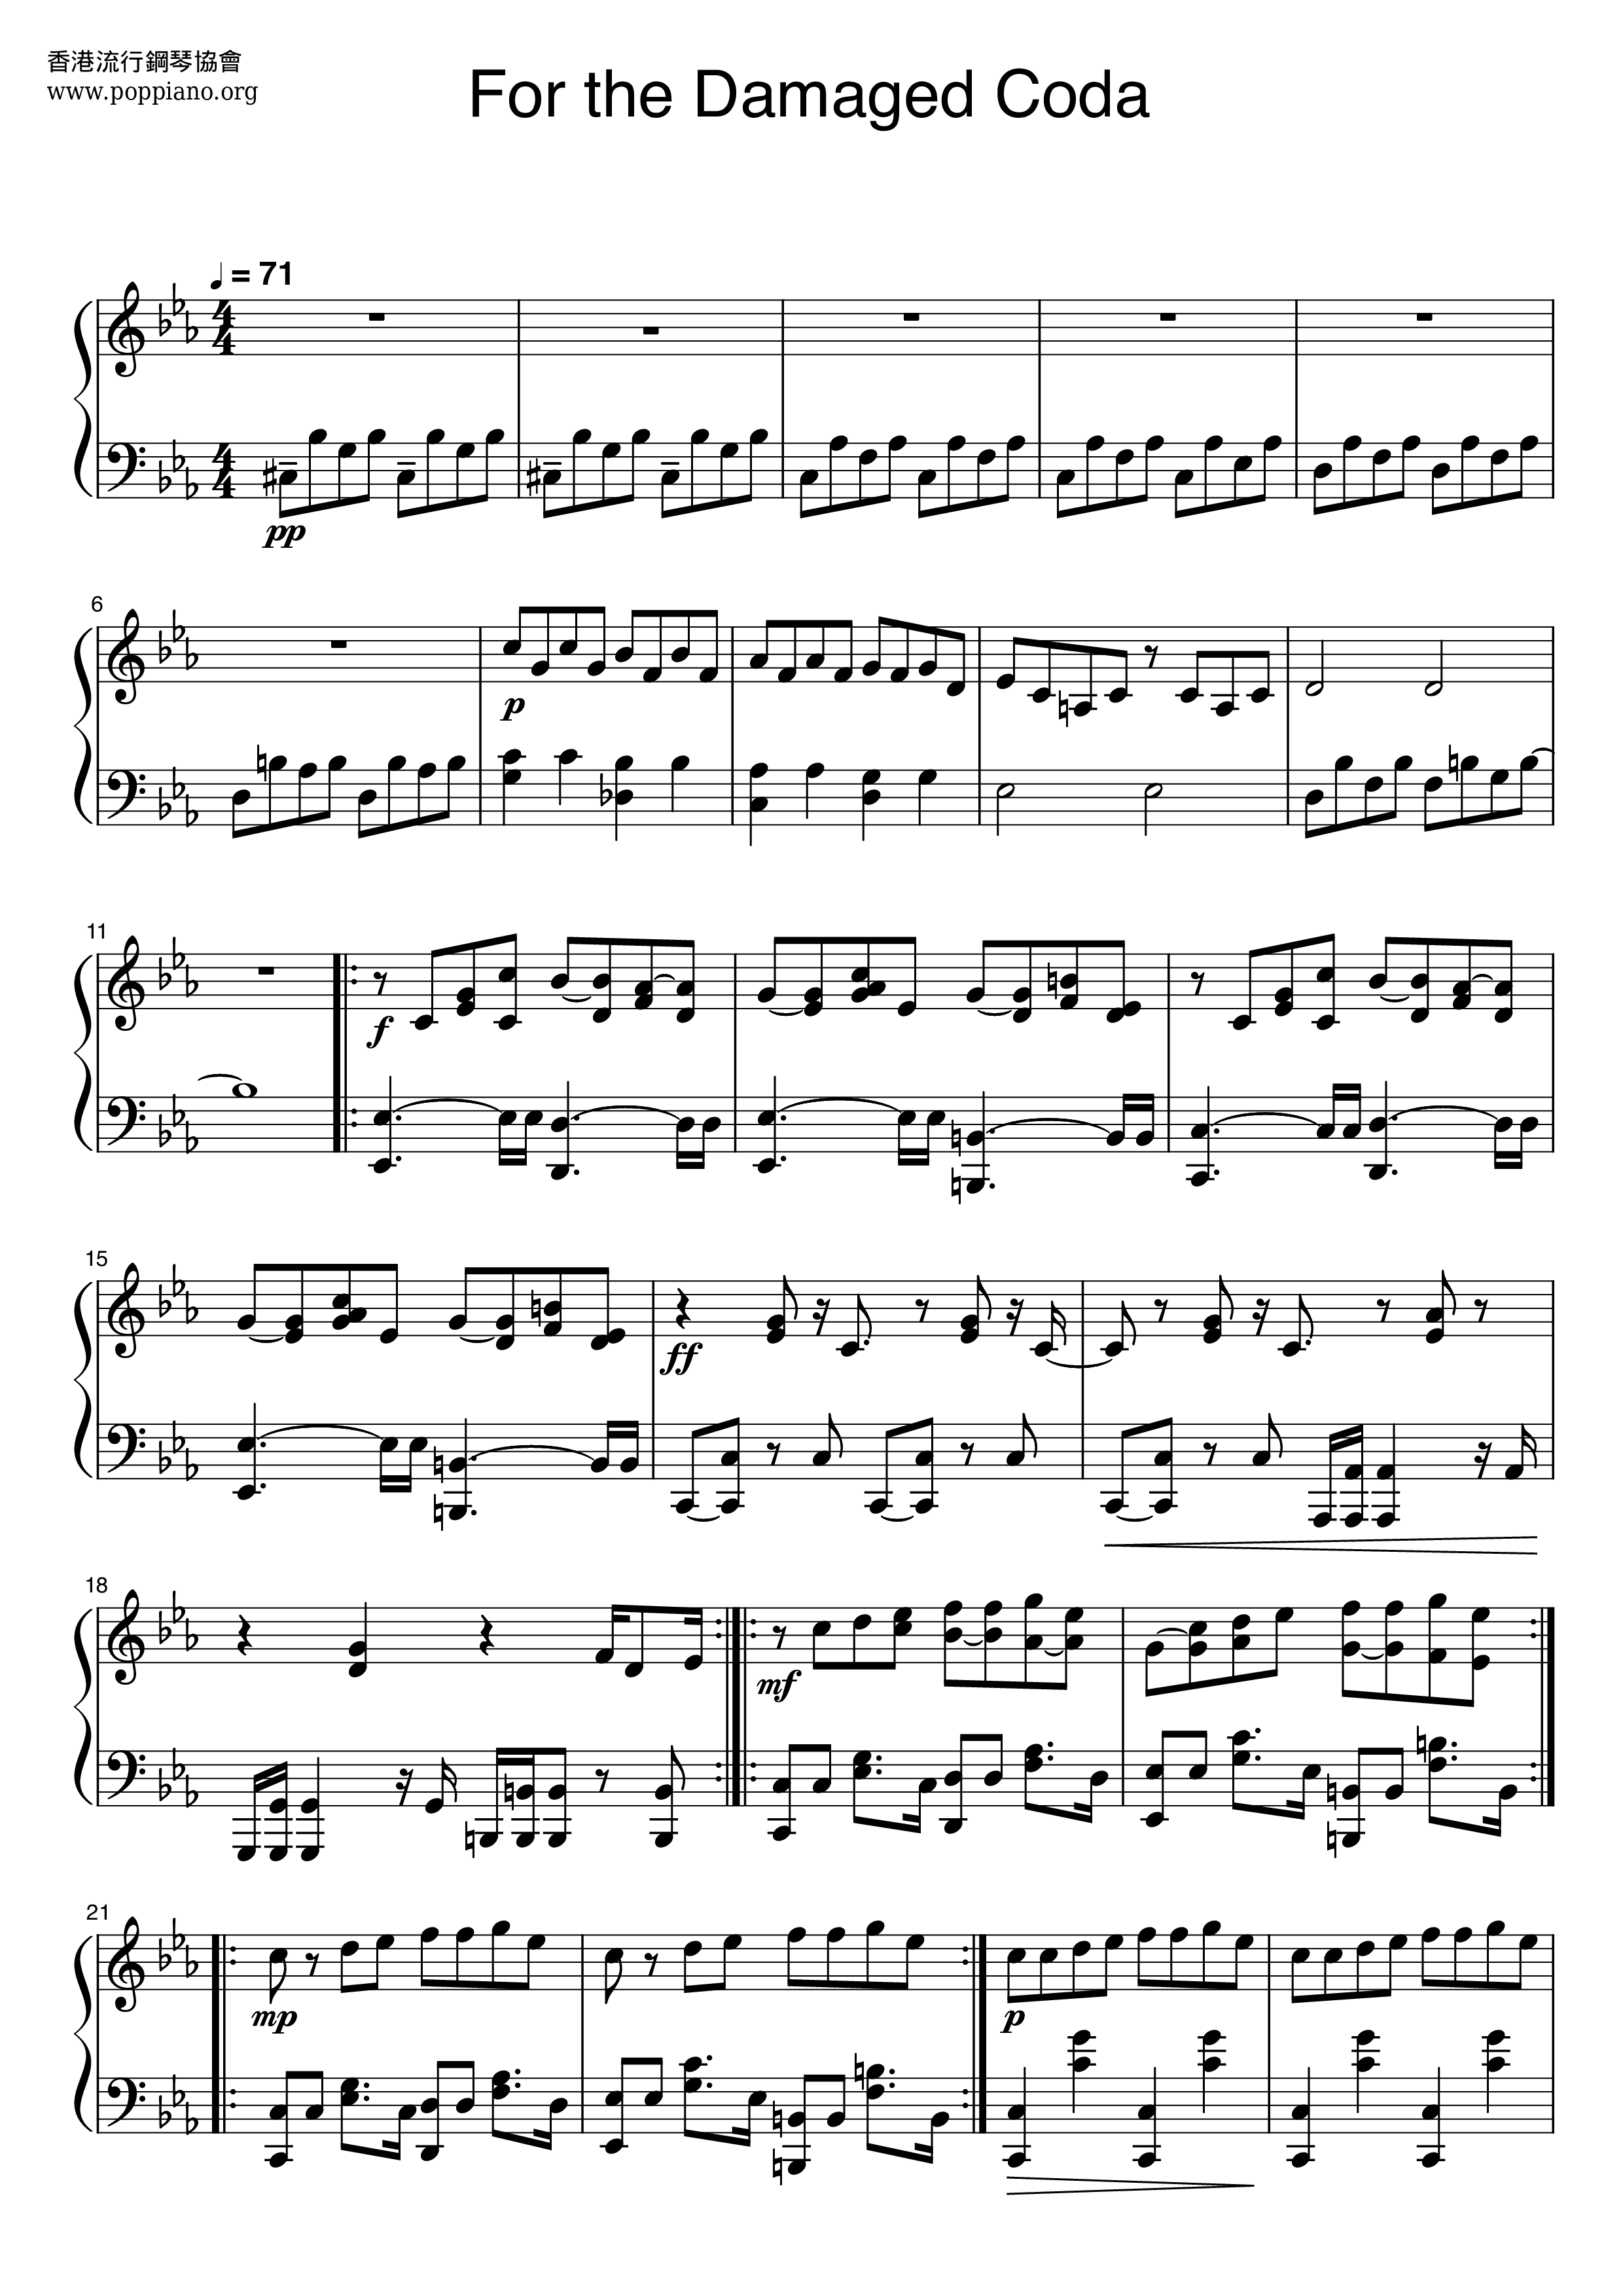 Rick And Morty-Evil Morty - For The Damaged Coda Sheet Music pdf